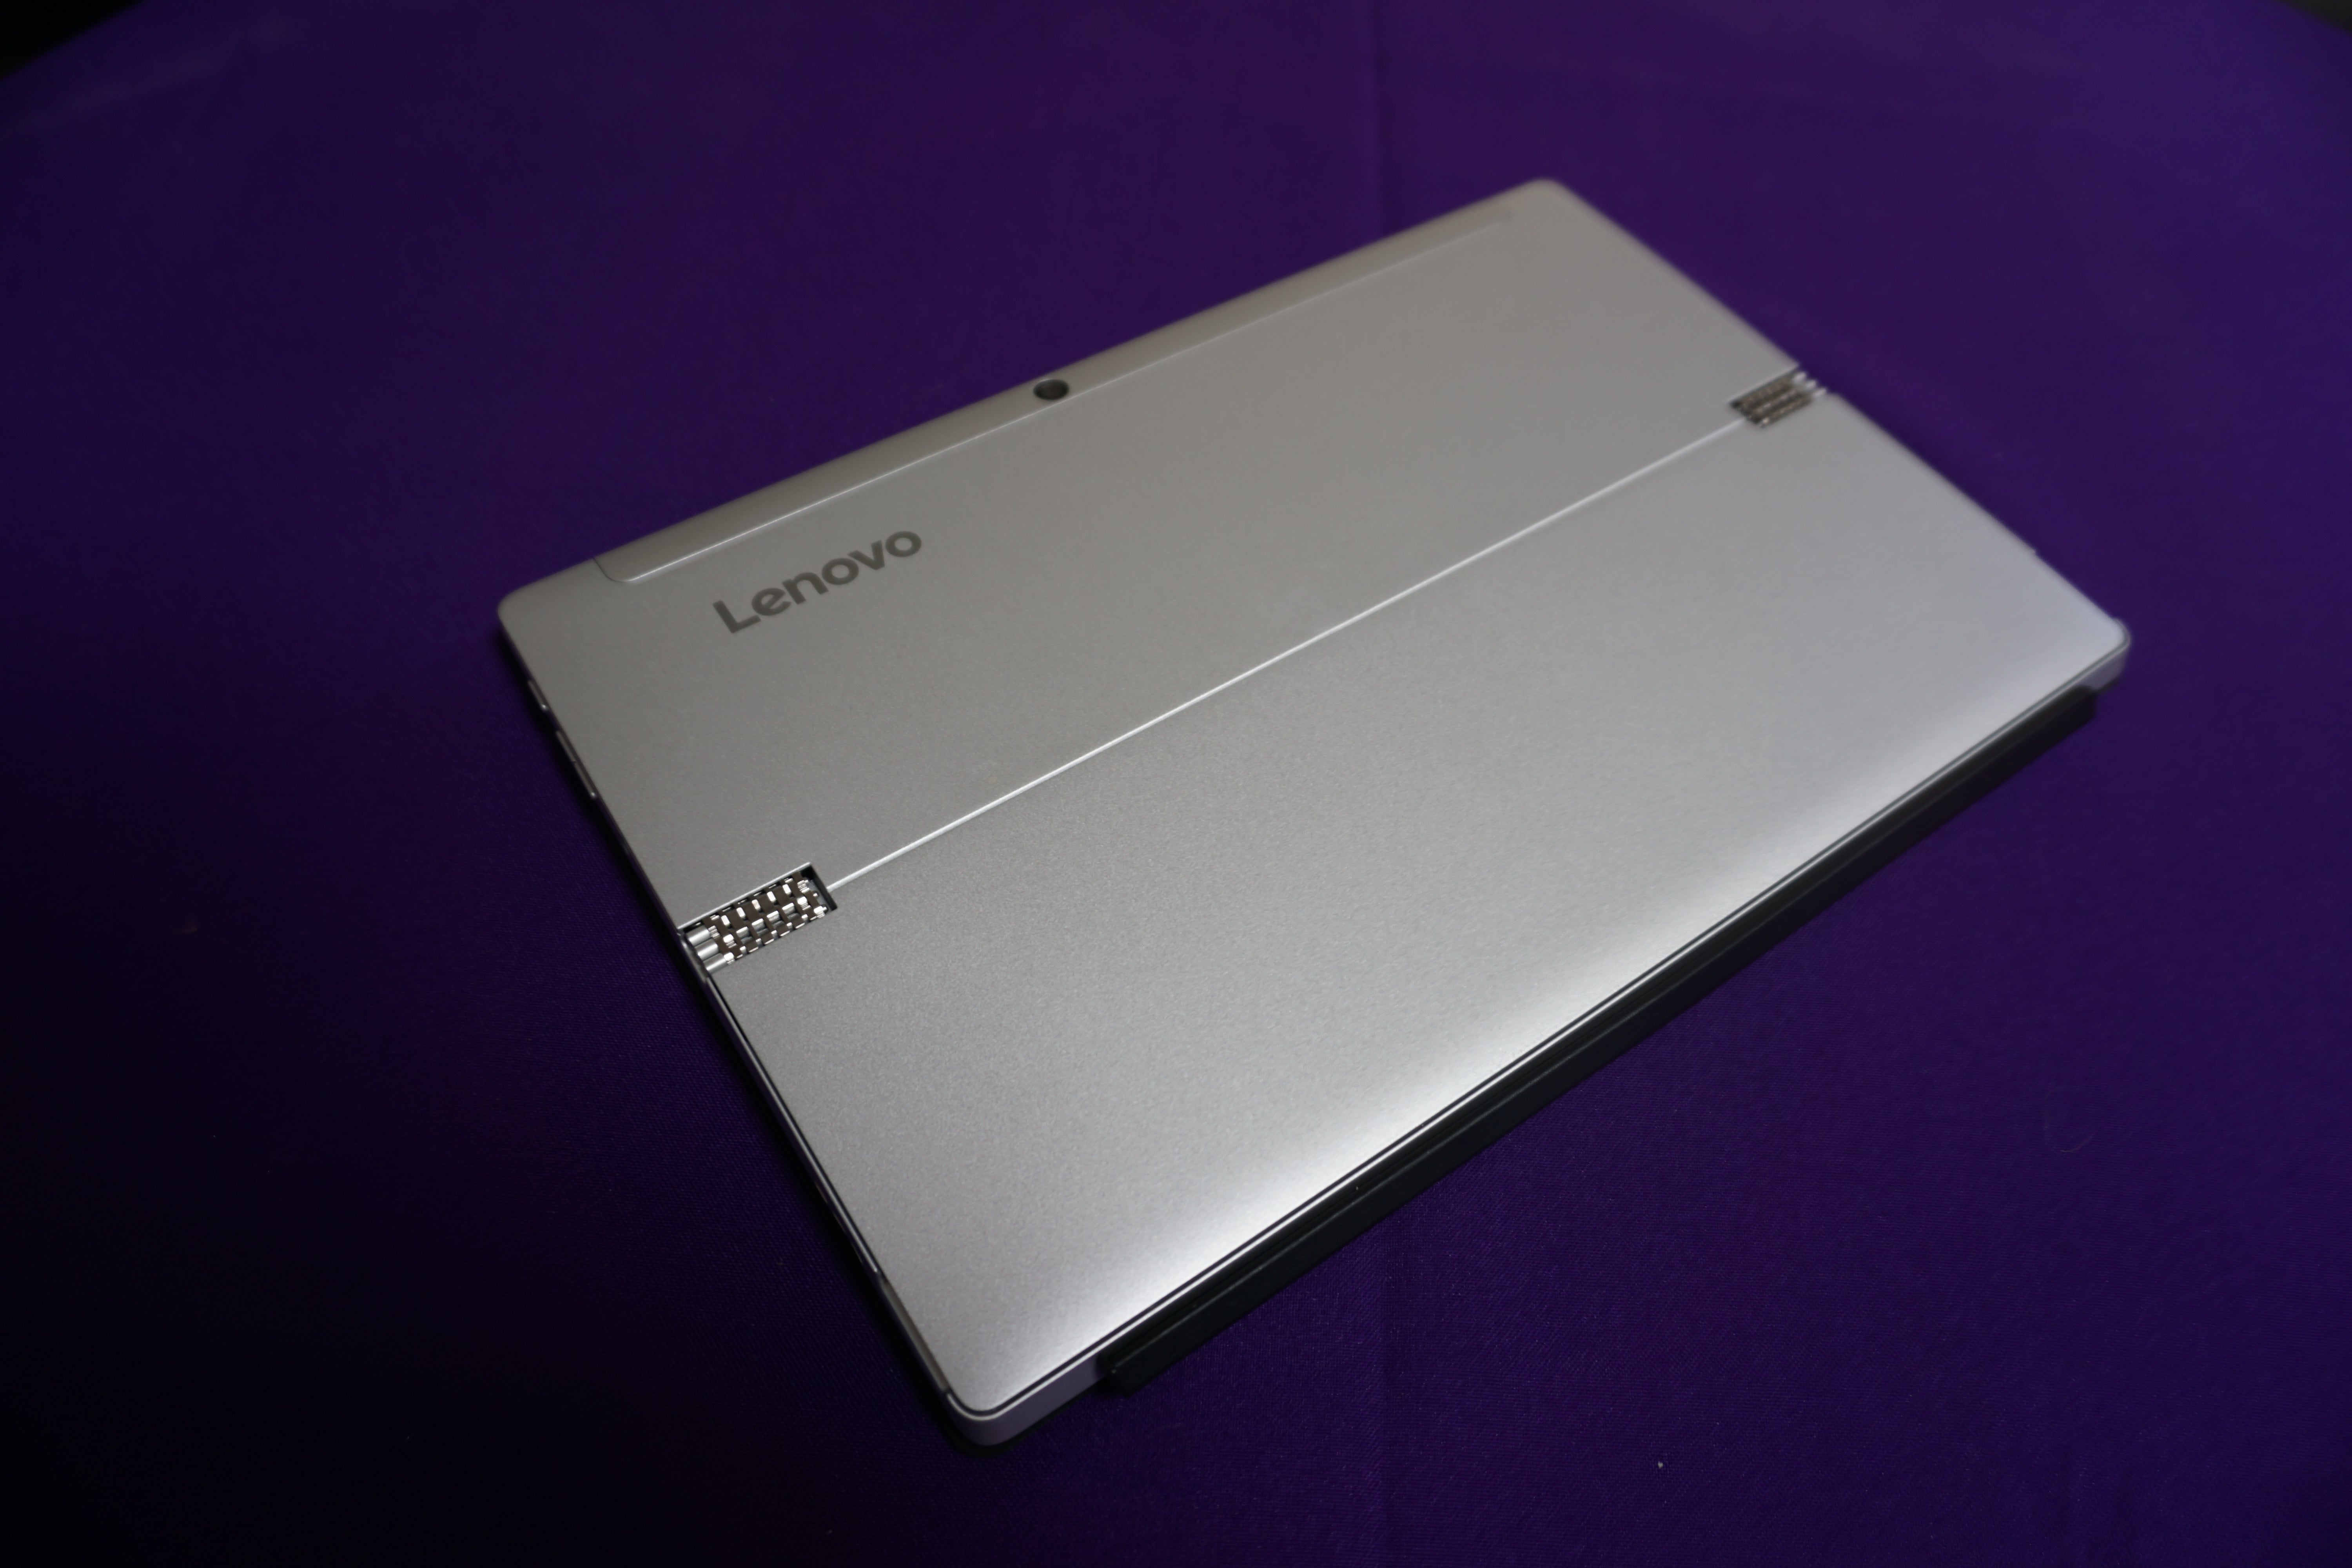 Lenovo Miix 510 convertible tablet with keyboard detached.